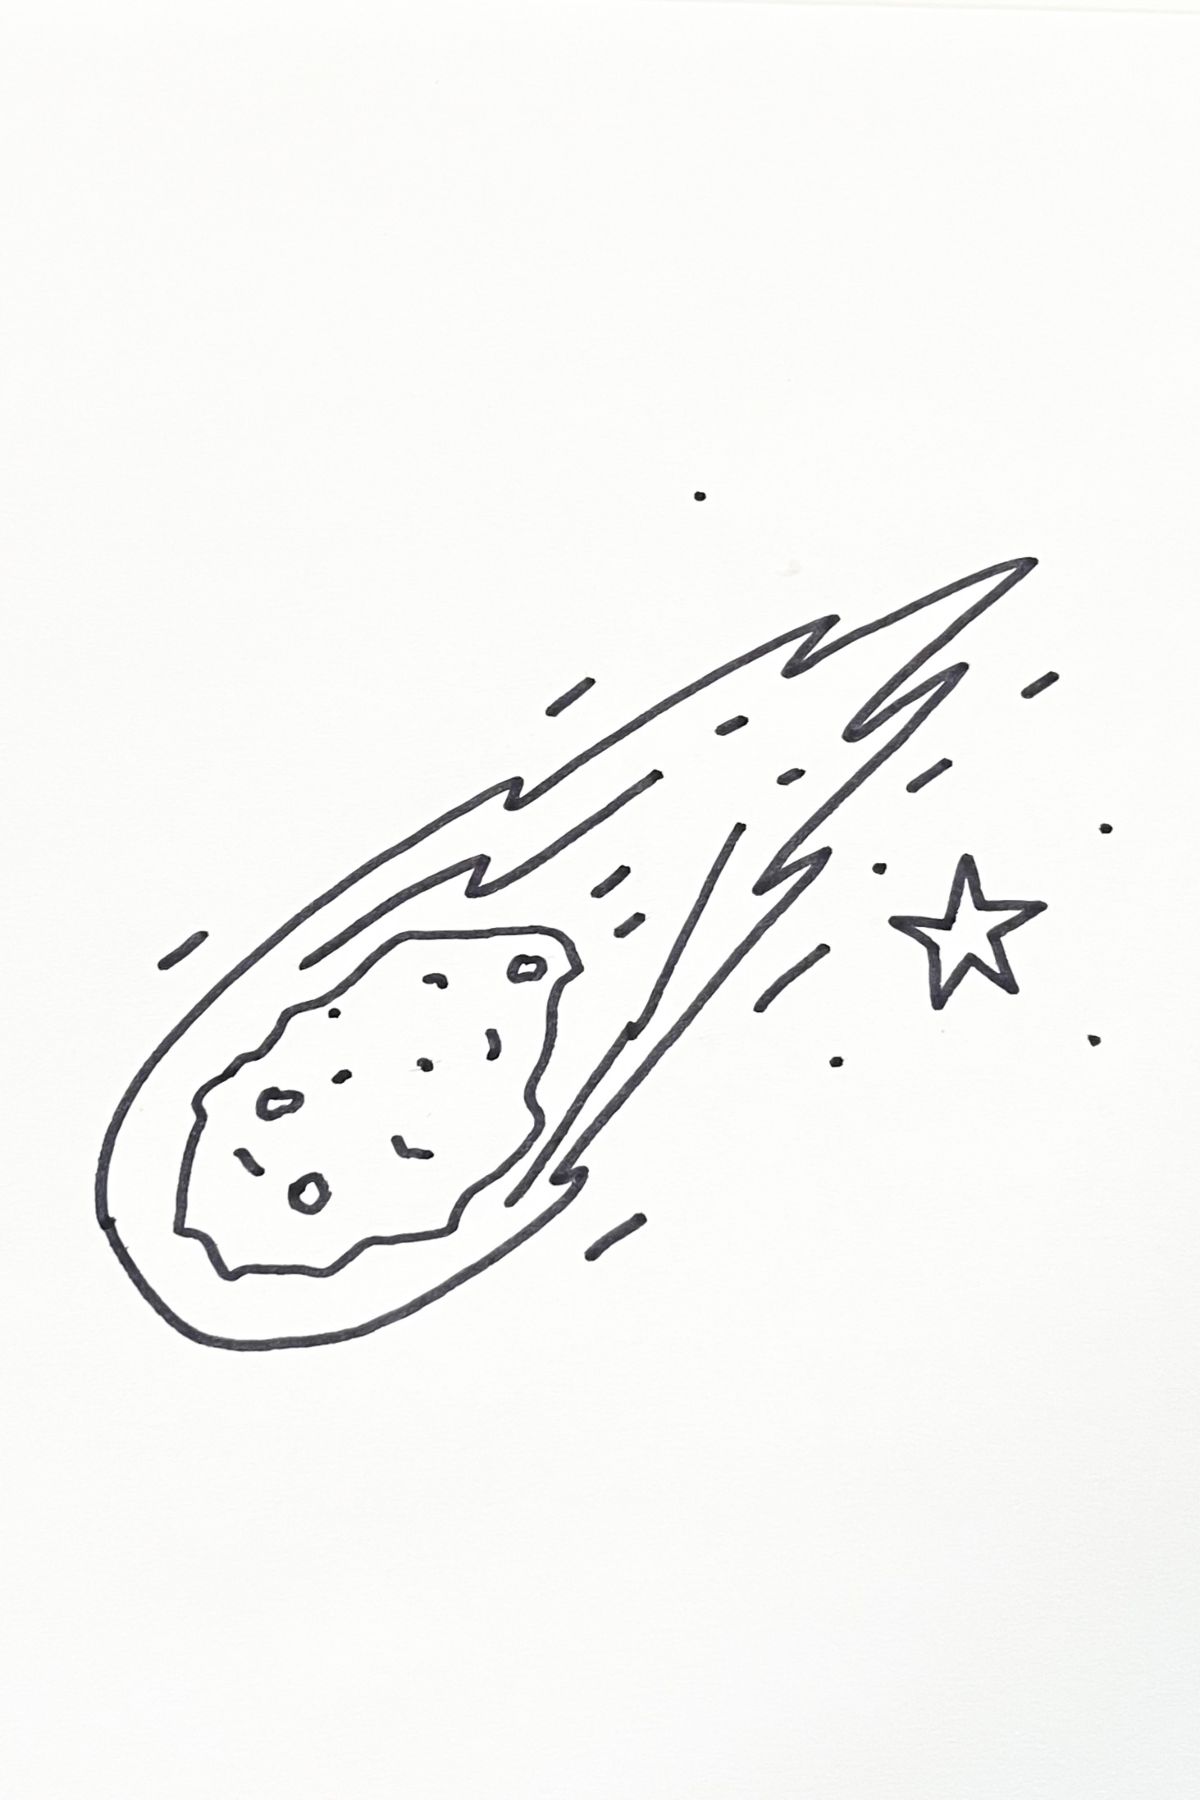 asteroid drawing idea